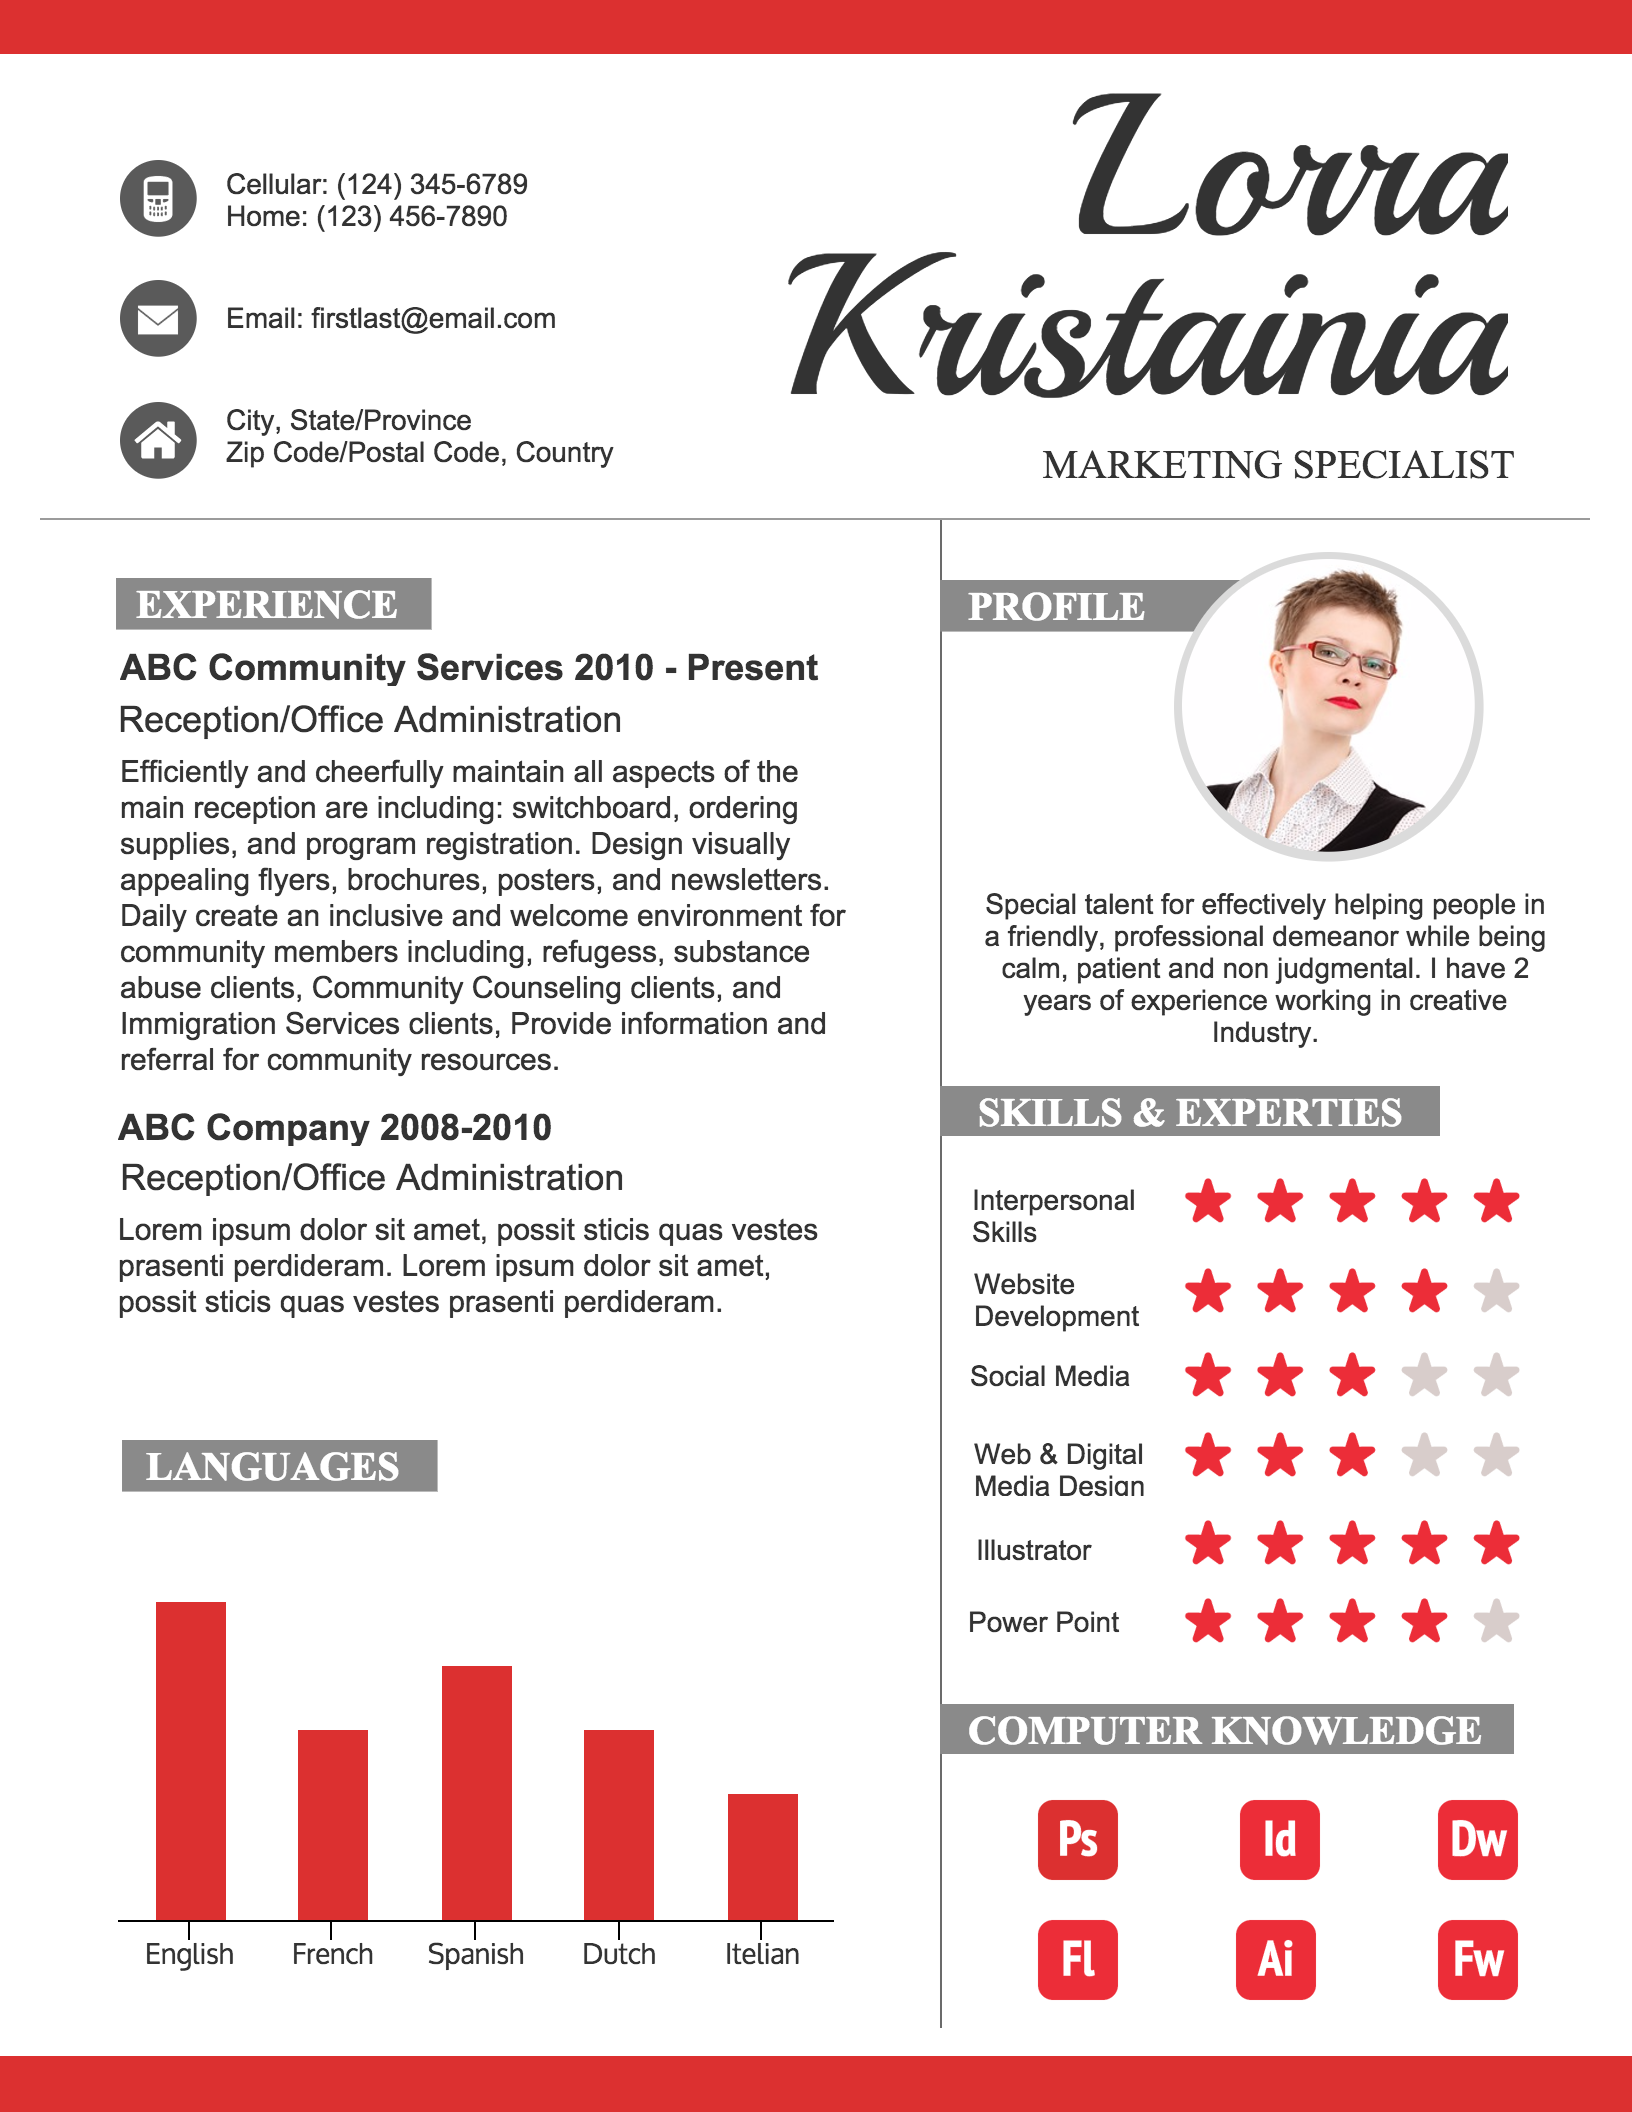 How to Create a Polished Infographic Resume [Infographic]